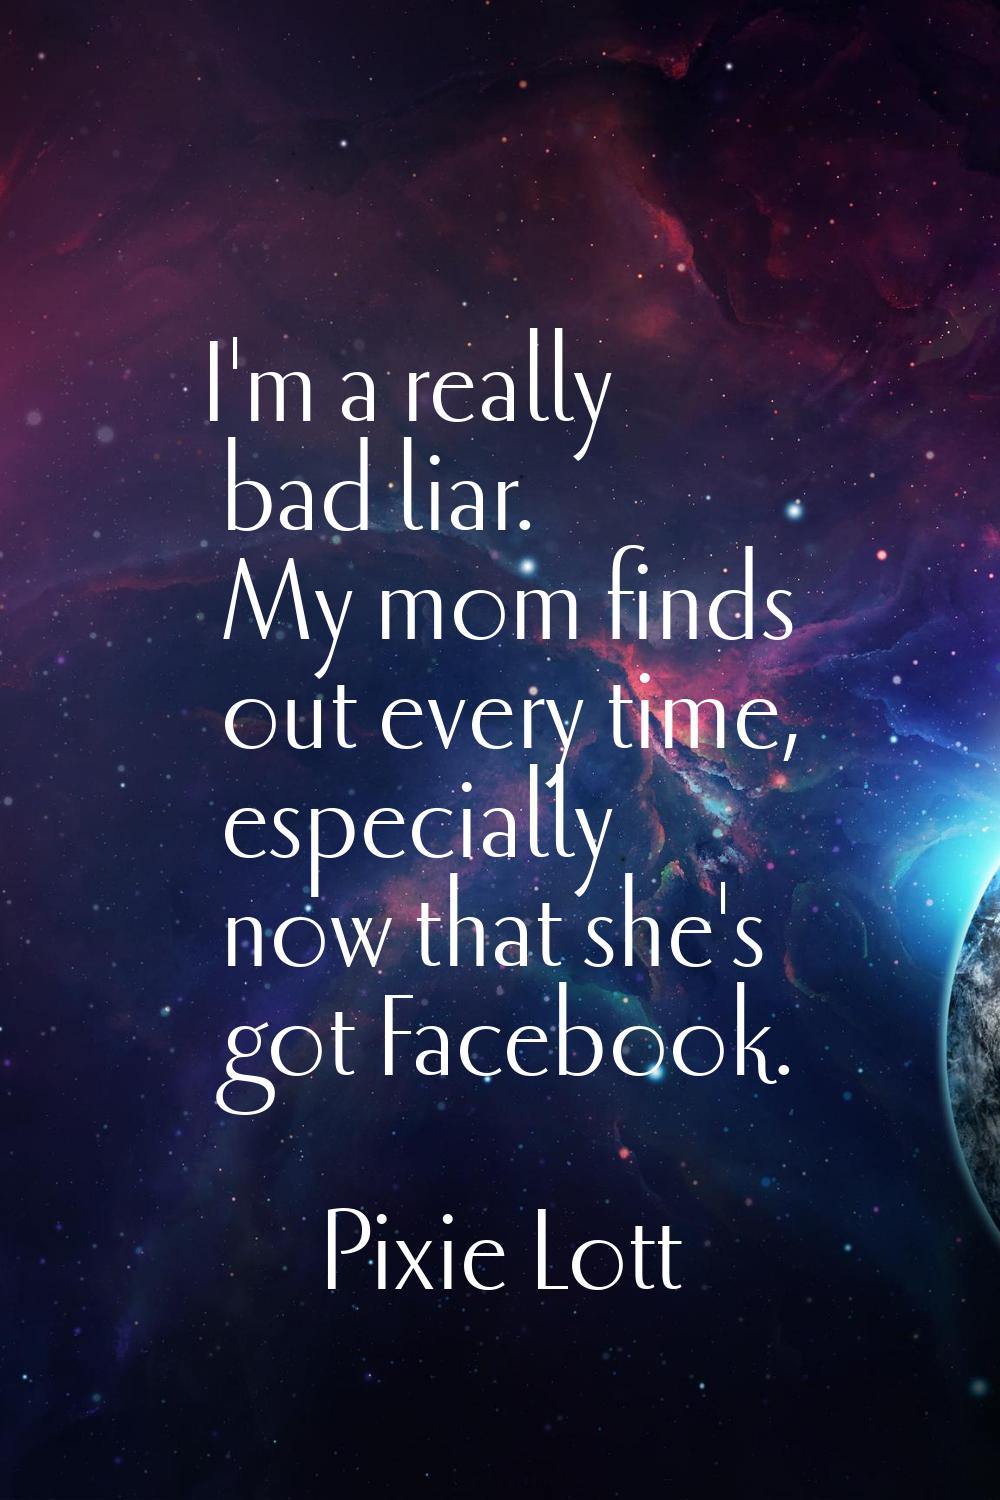 I'm a really bad liar. My mom finds out every time, especially now that she's got Facebook.